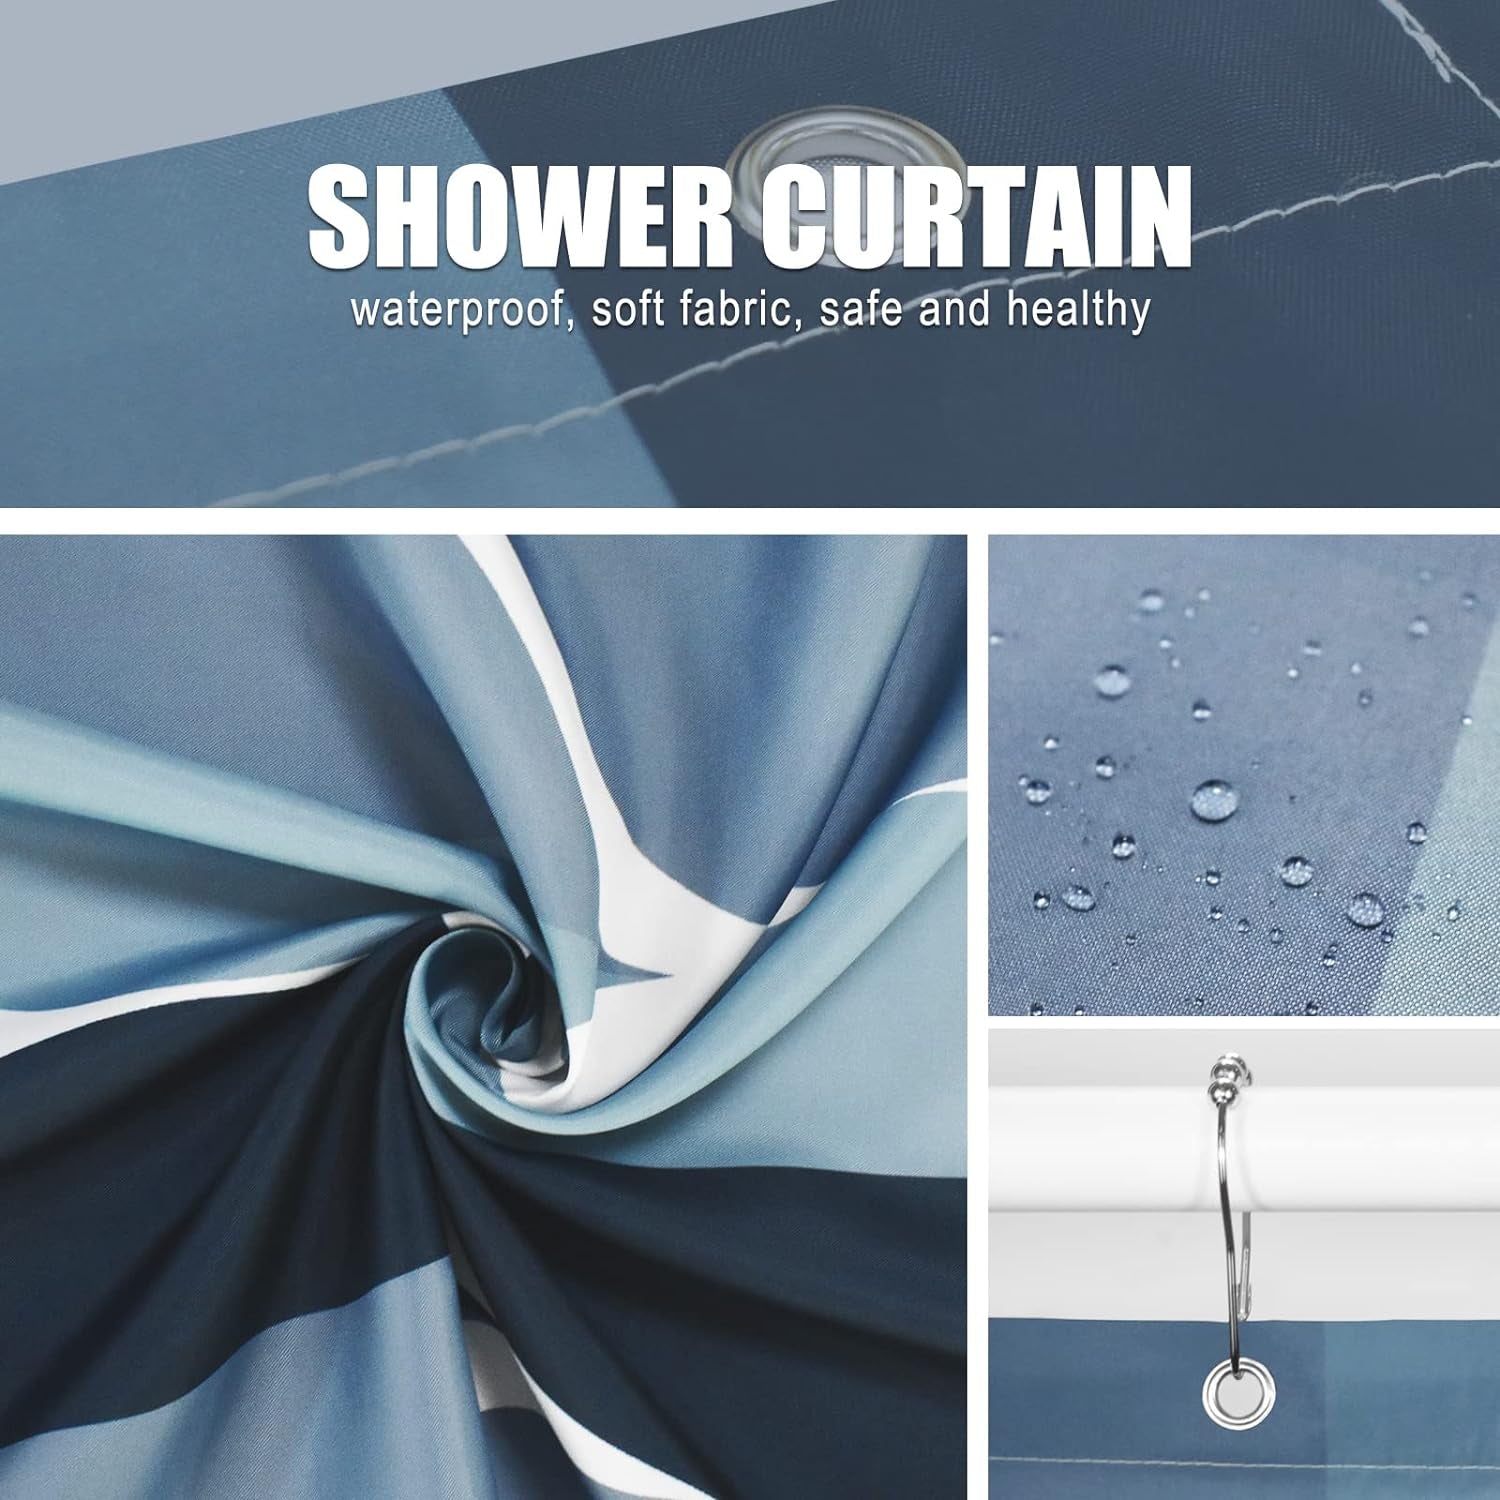 Aegean Blue Fabric Bath Shower Curtain W 54 X H 72,Waterproof Design and Polyester, Quick-Drying, Heavy Weight, Stall Size Shower Curtains Set for Bathroom,Machine Washable with 8 Hooks